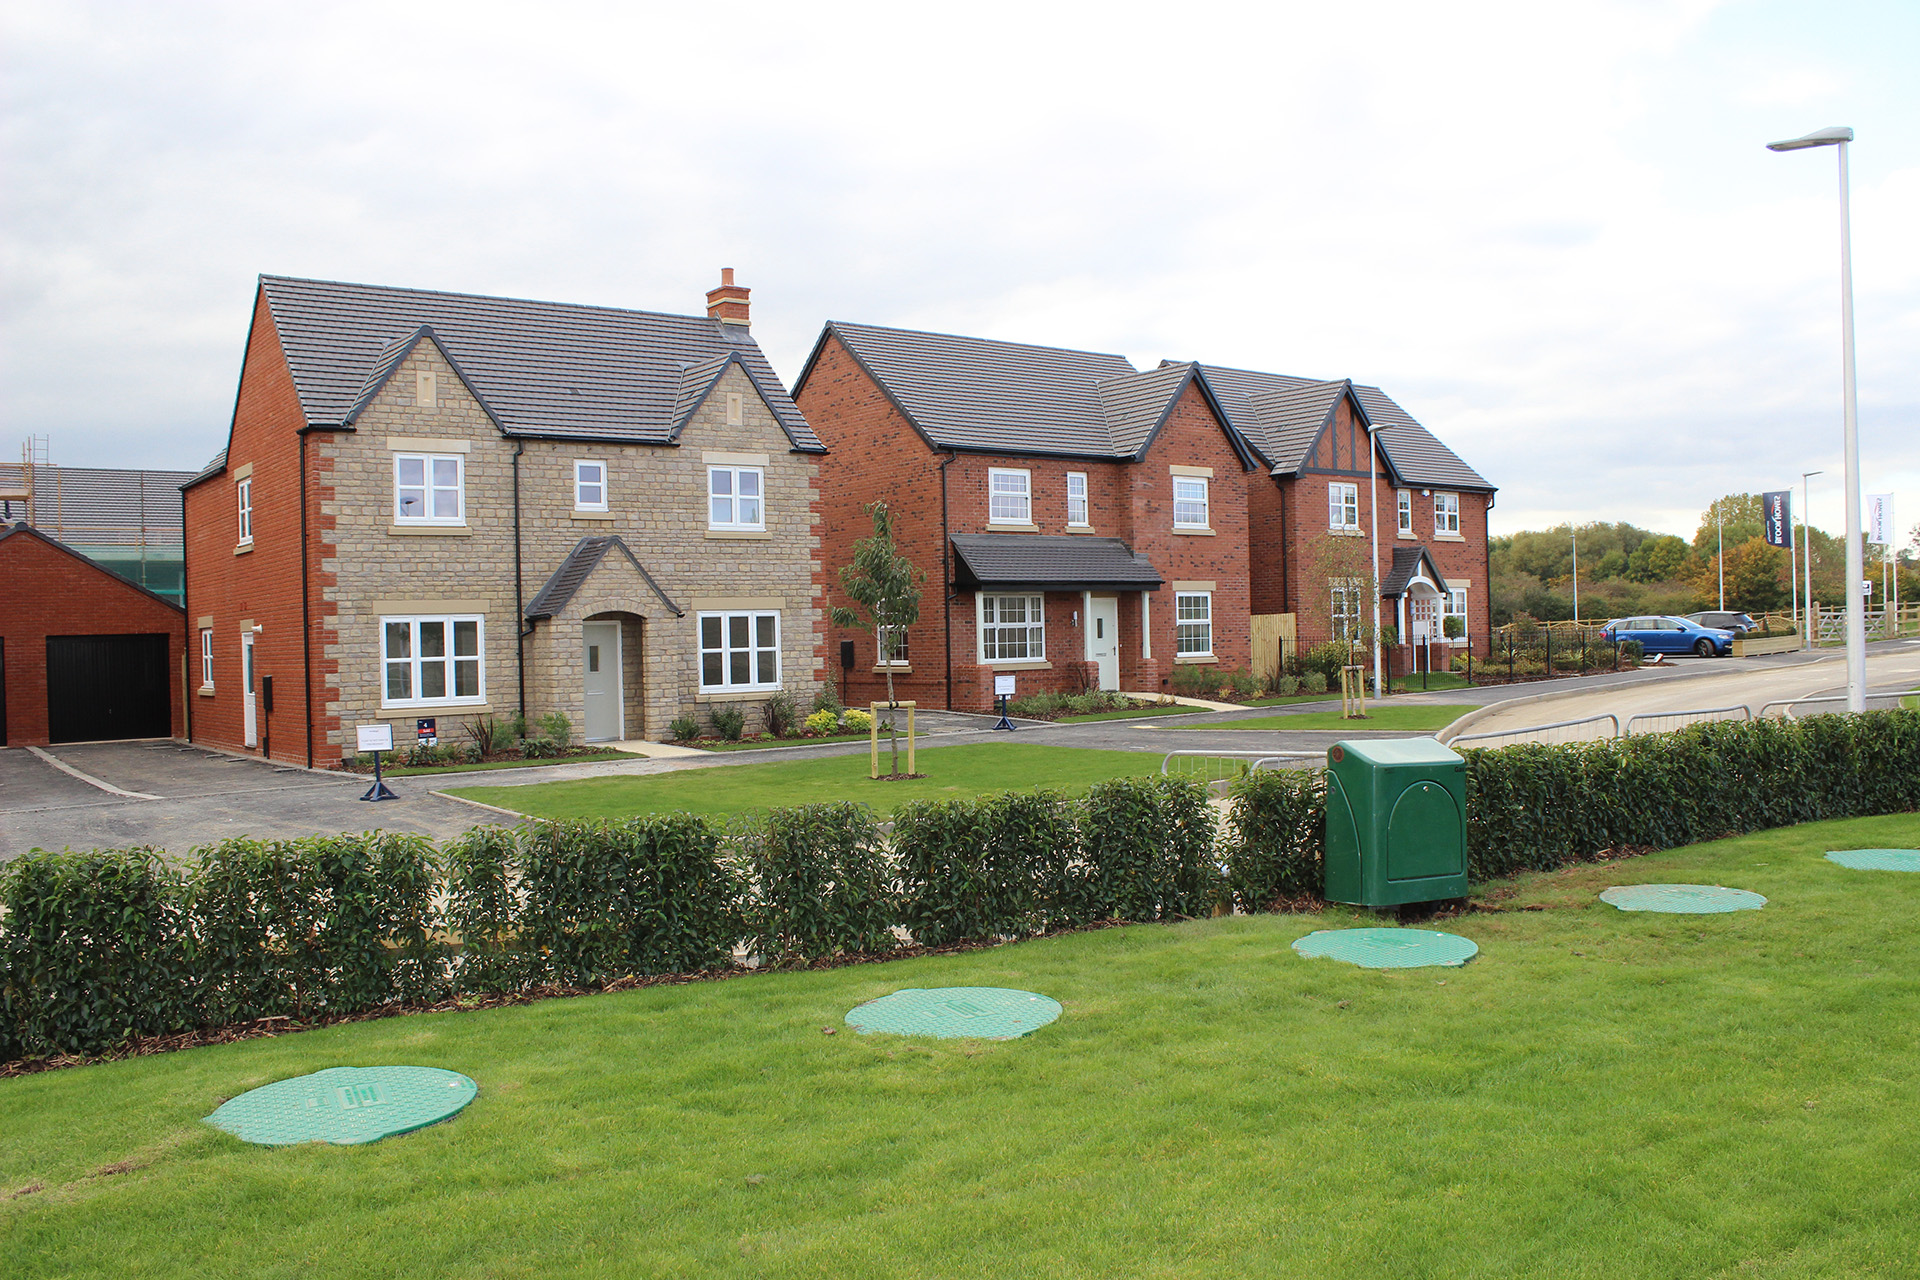 Five LPG underground tank covers in front of three large detached houses